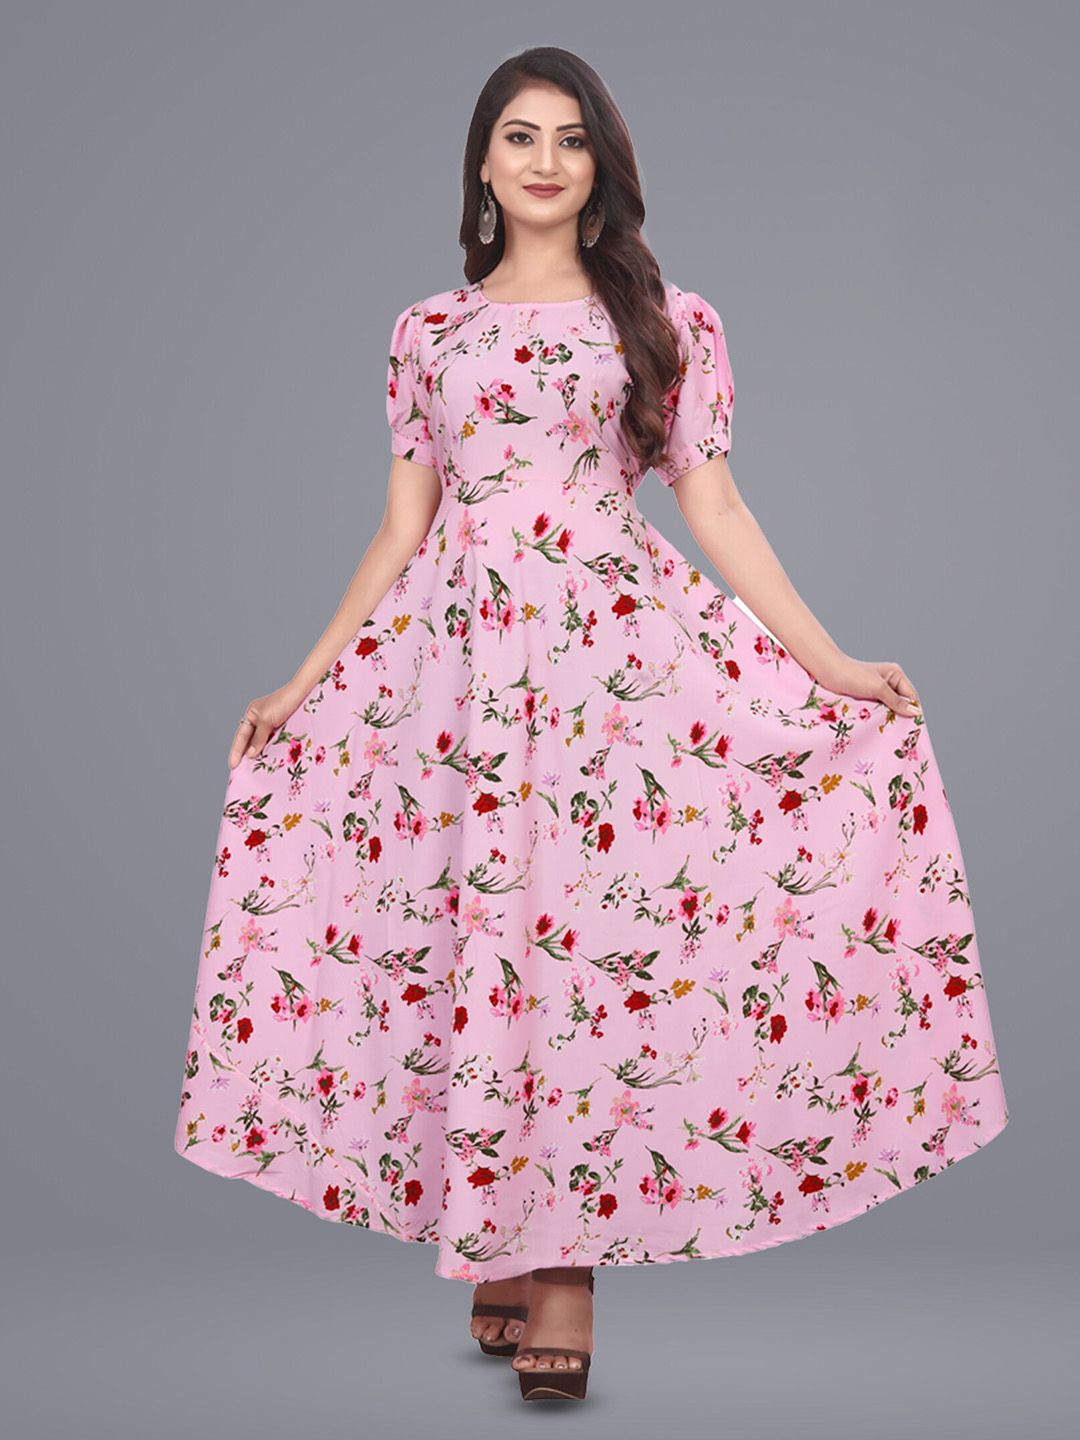 N N ENTERPRISE Floral Printed Puff Sleeve Fit & Flare Maxi Dress Price in India